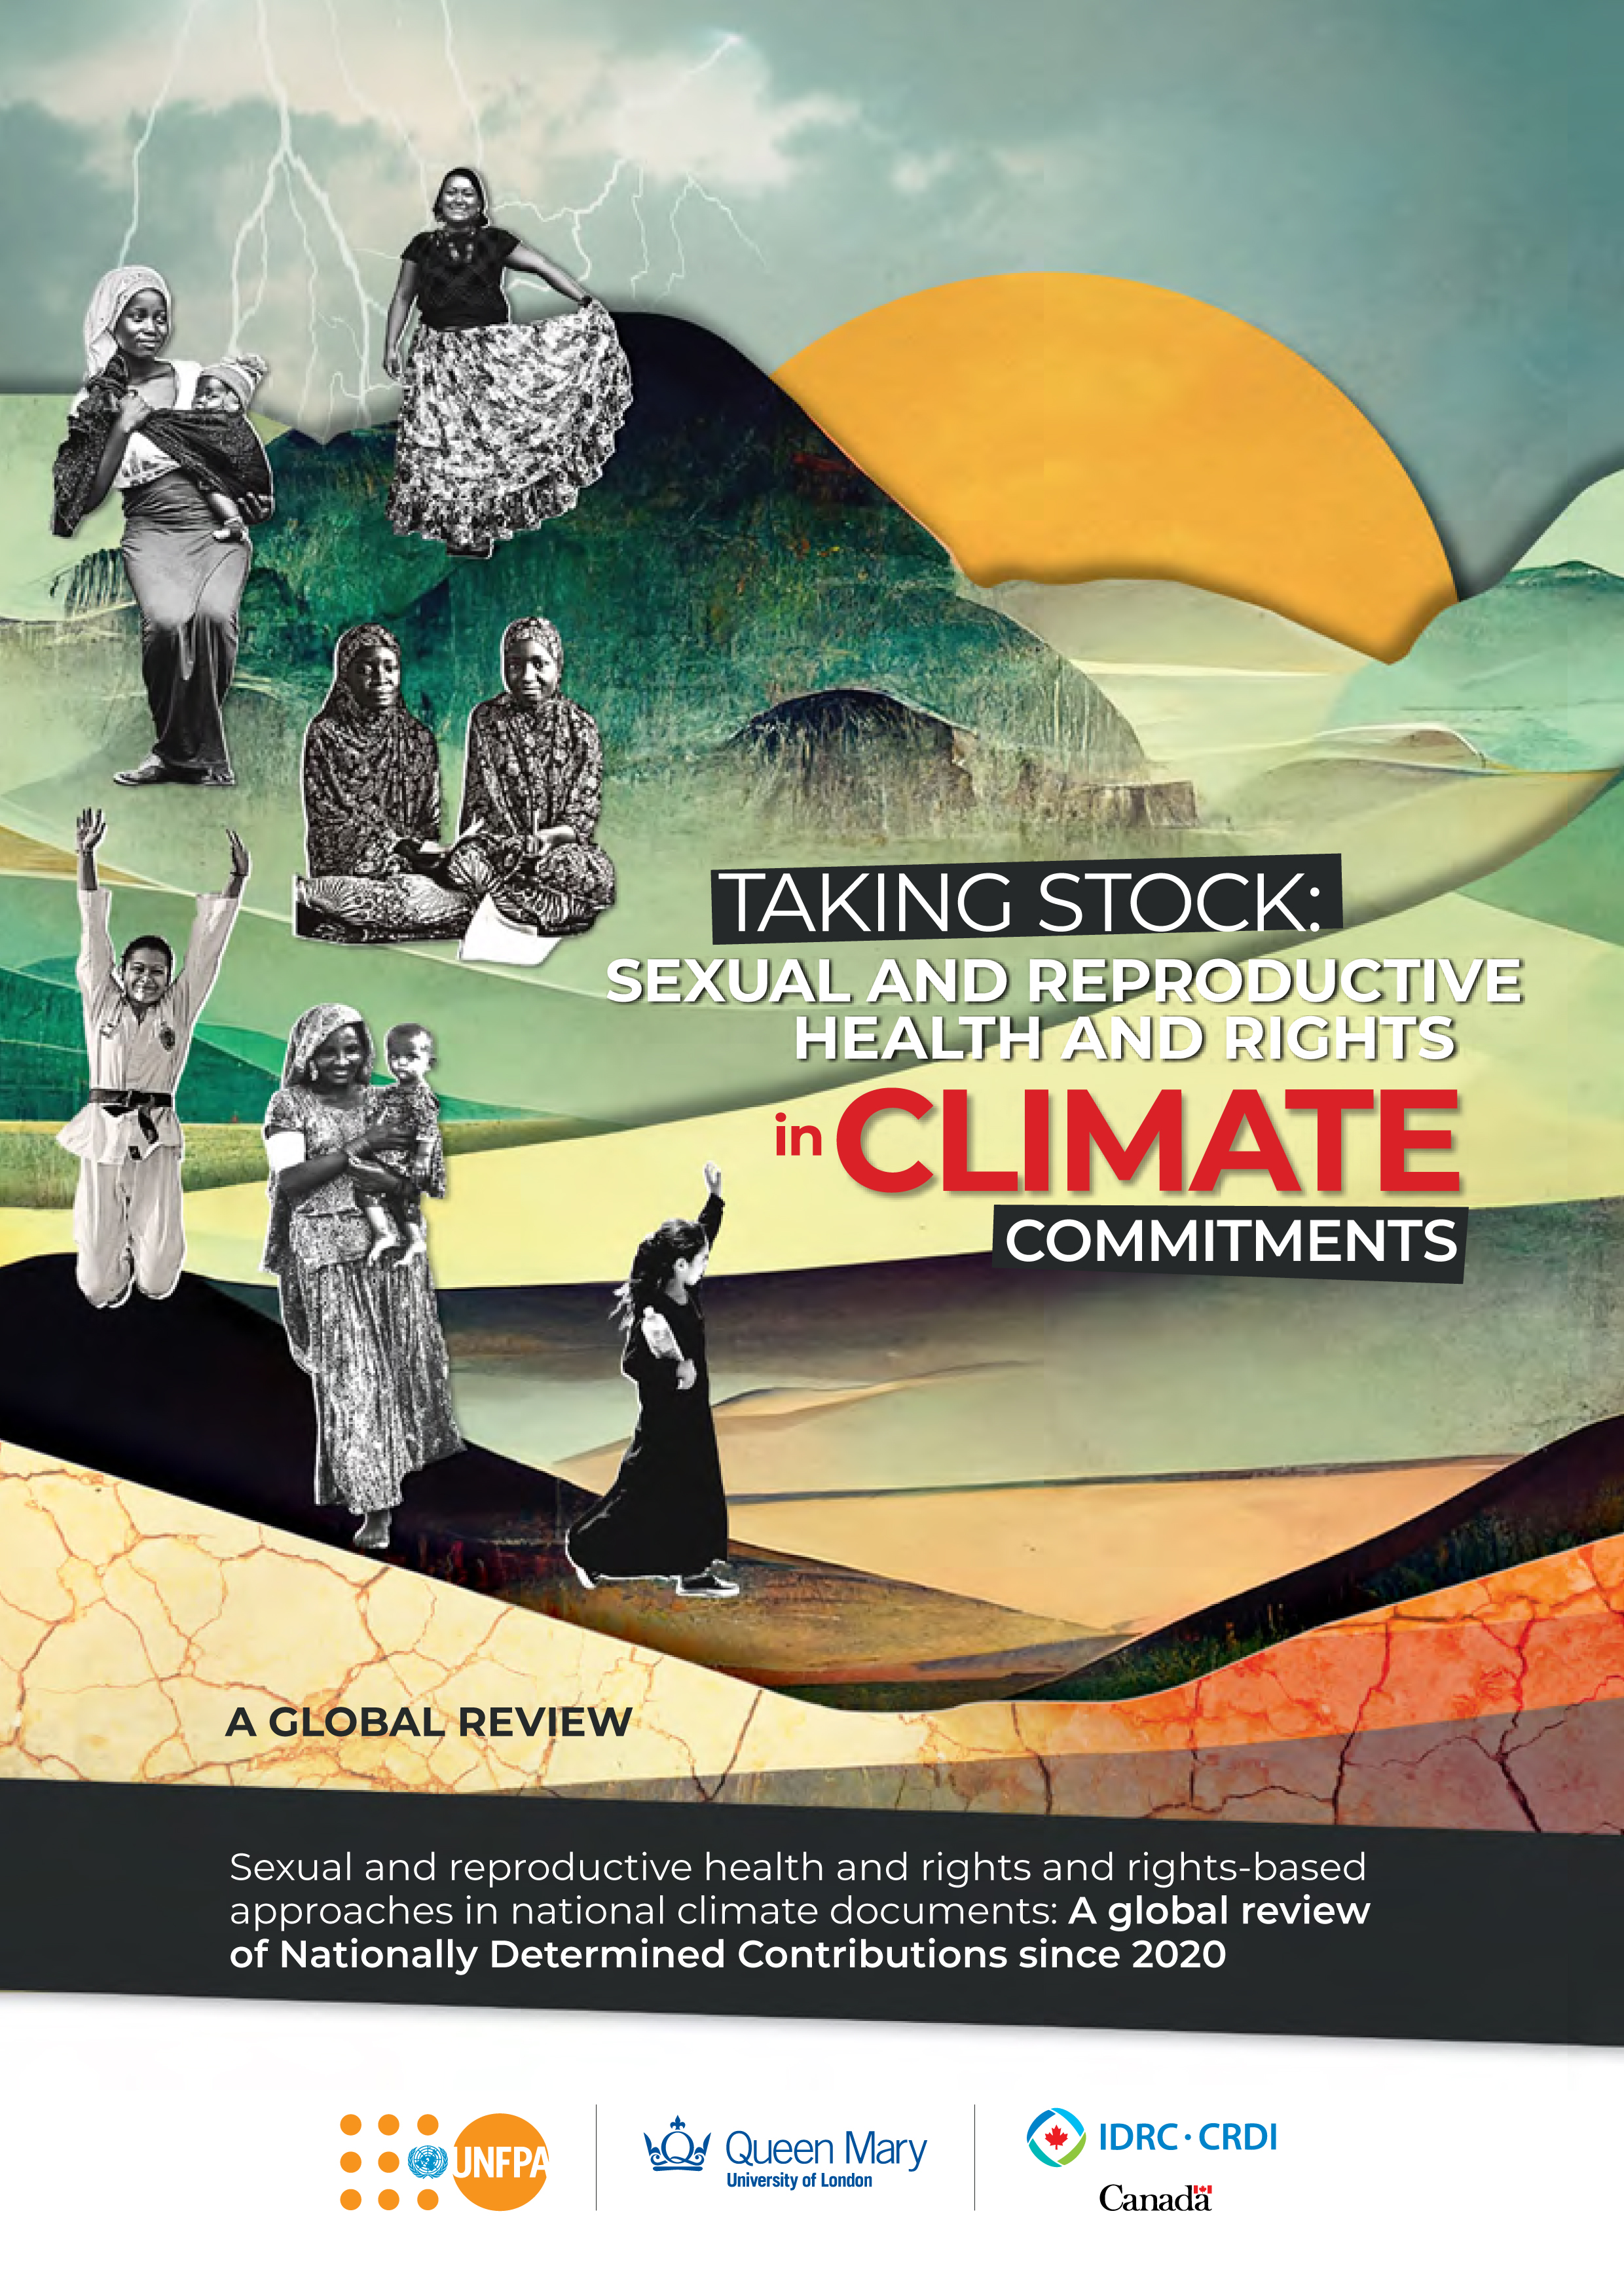 Taking Stock: Sexual and Reproductive Health and Rights in Climate Commitments